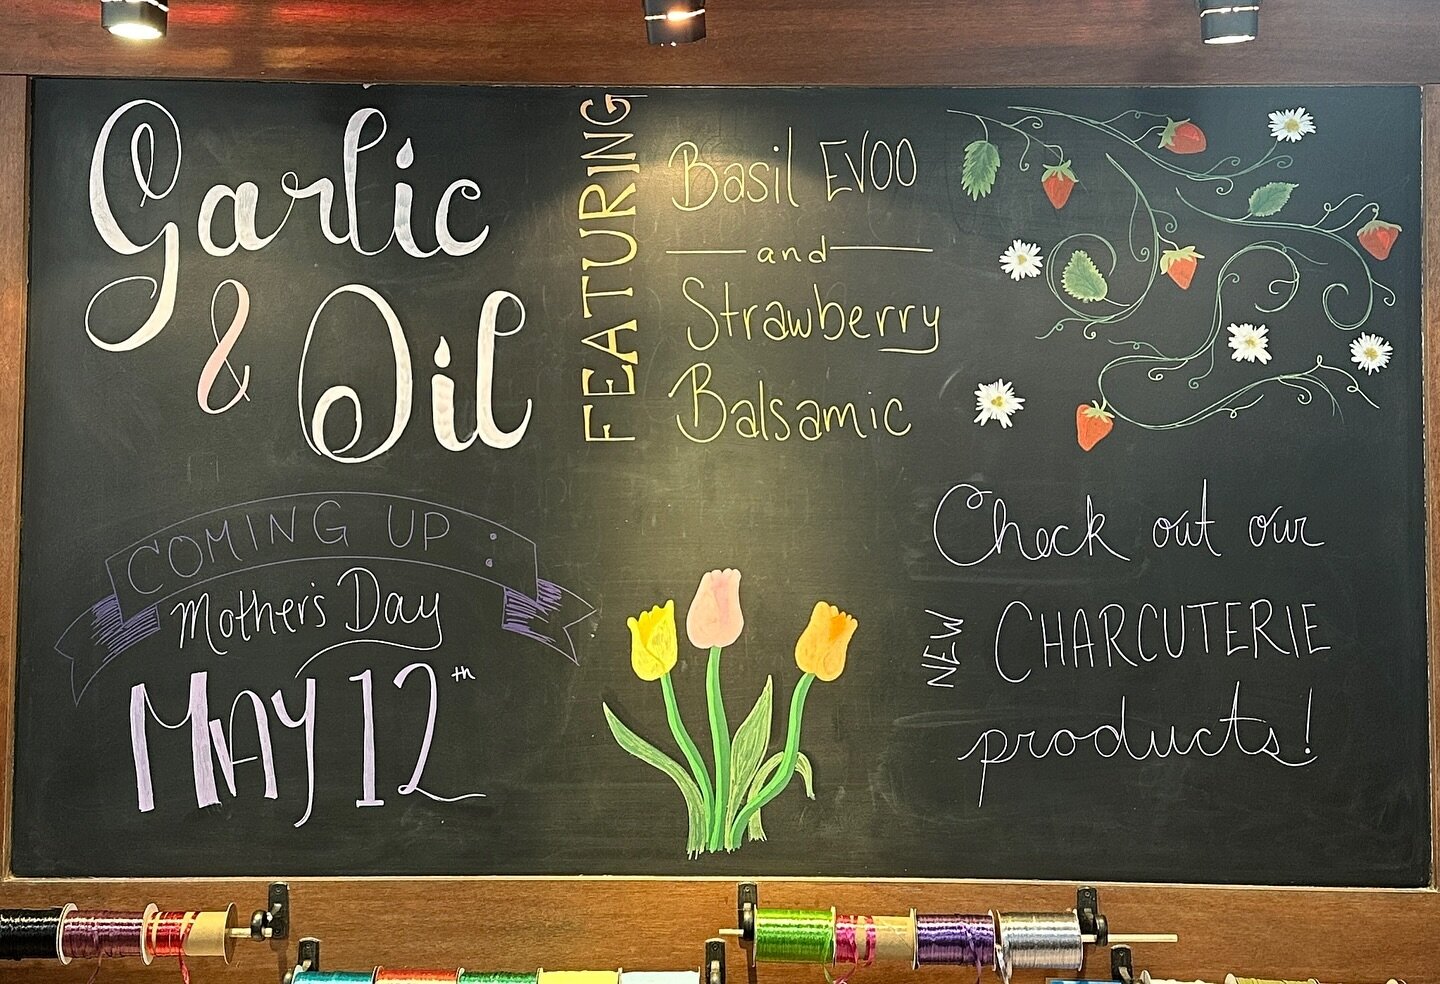 April&rsquo;s chalkboard provided by @cynjamstudio

Stop in every month to see new artwork, learn about upcoming events and get inspired with our oil and vinegar specials!